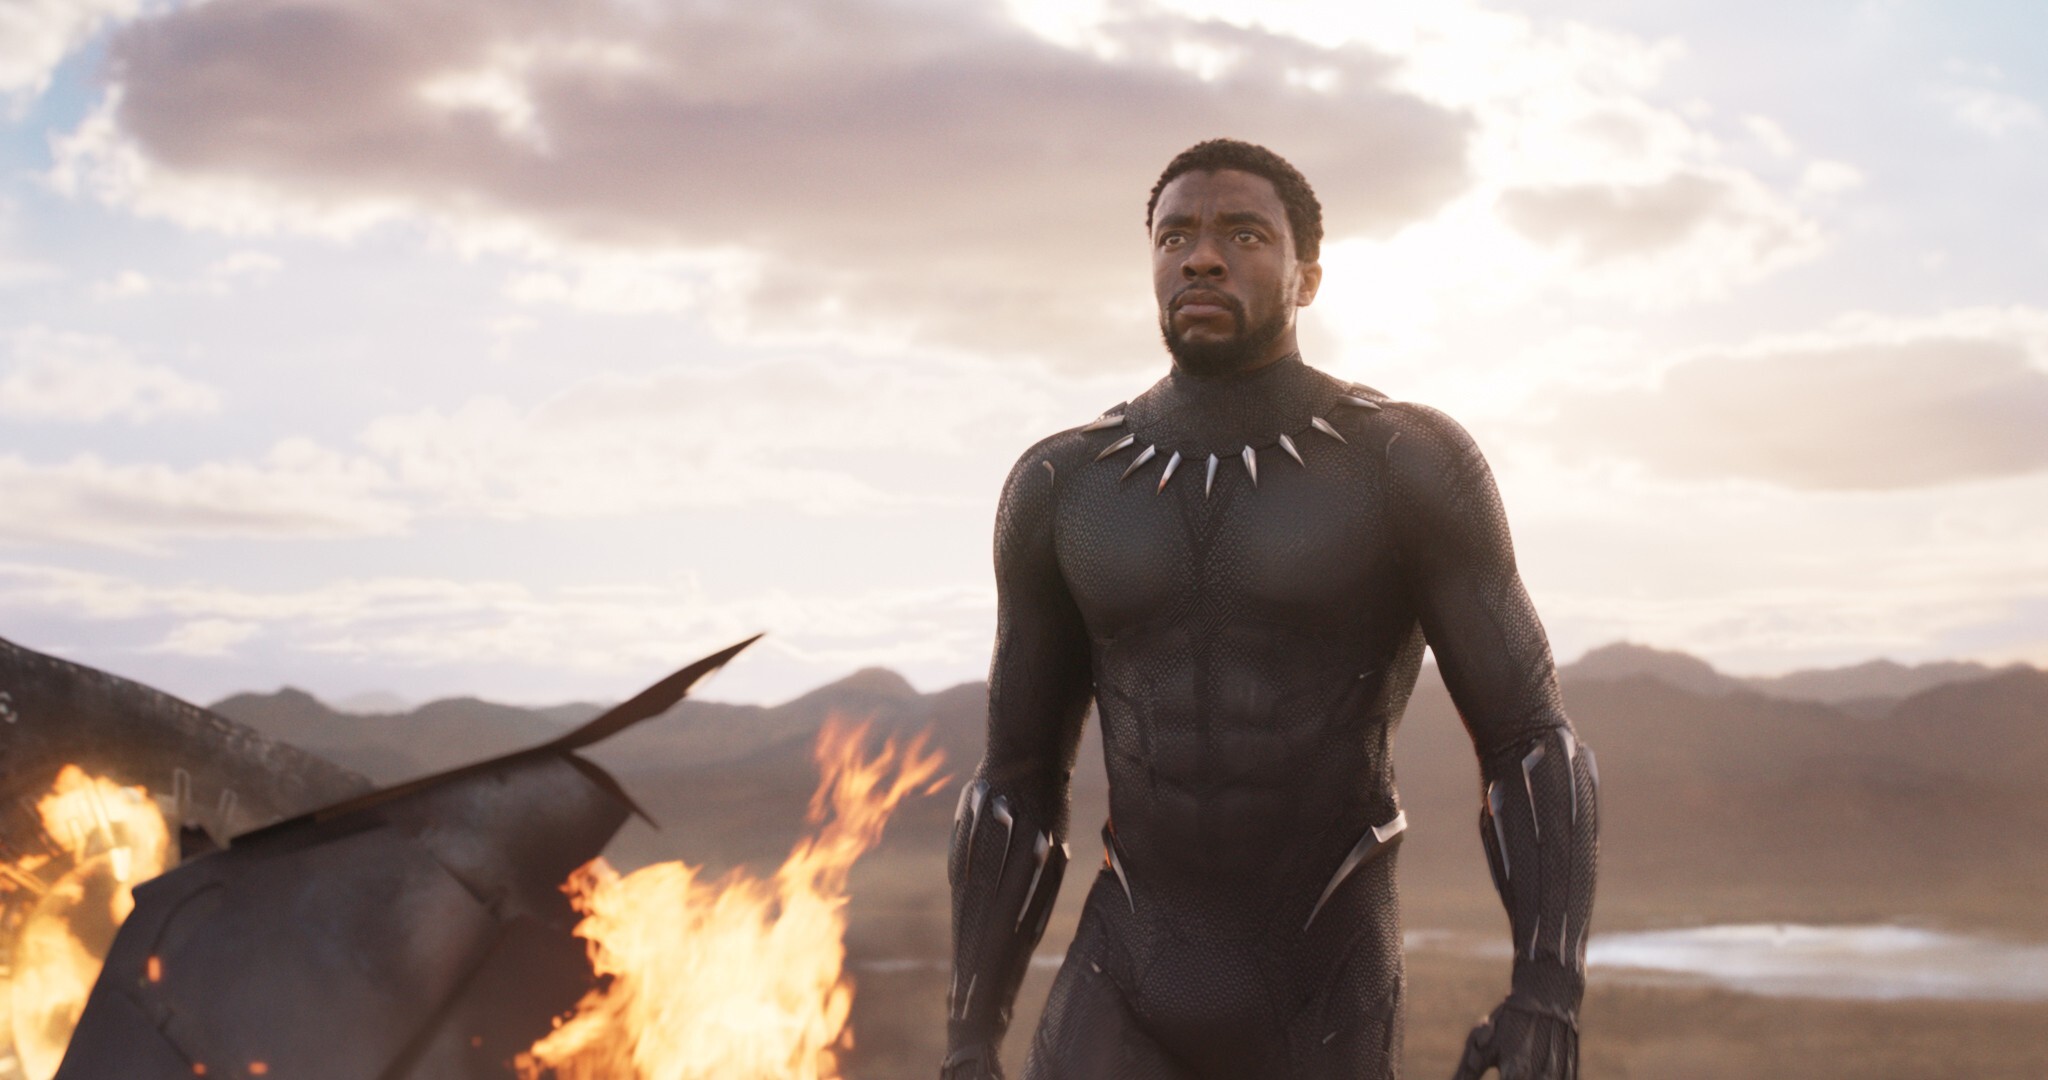 US actor Chadwick Boseman was best known for playing the leading role in the 2018 Marvel film ‘Black Panther’. Photo: Handout